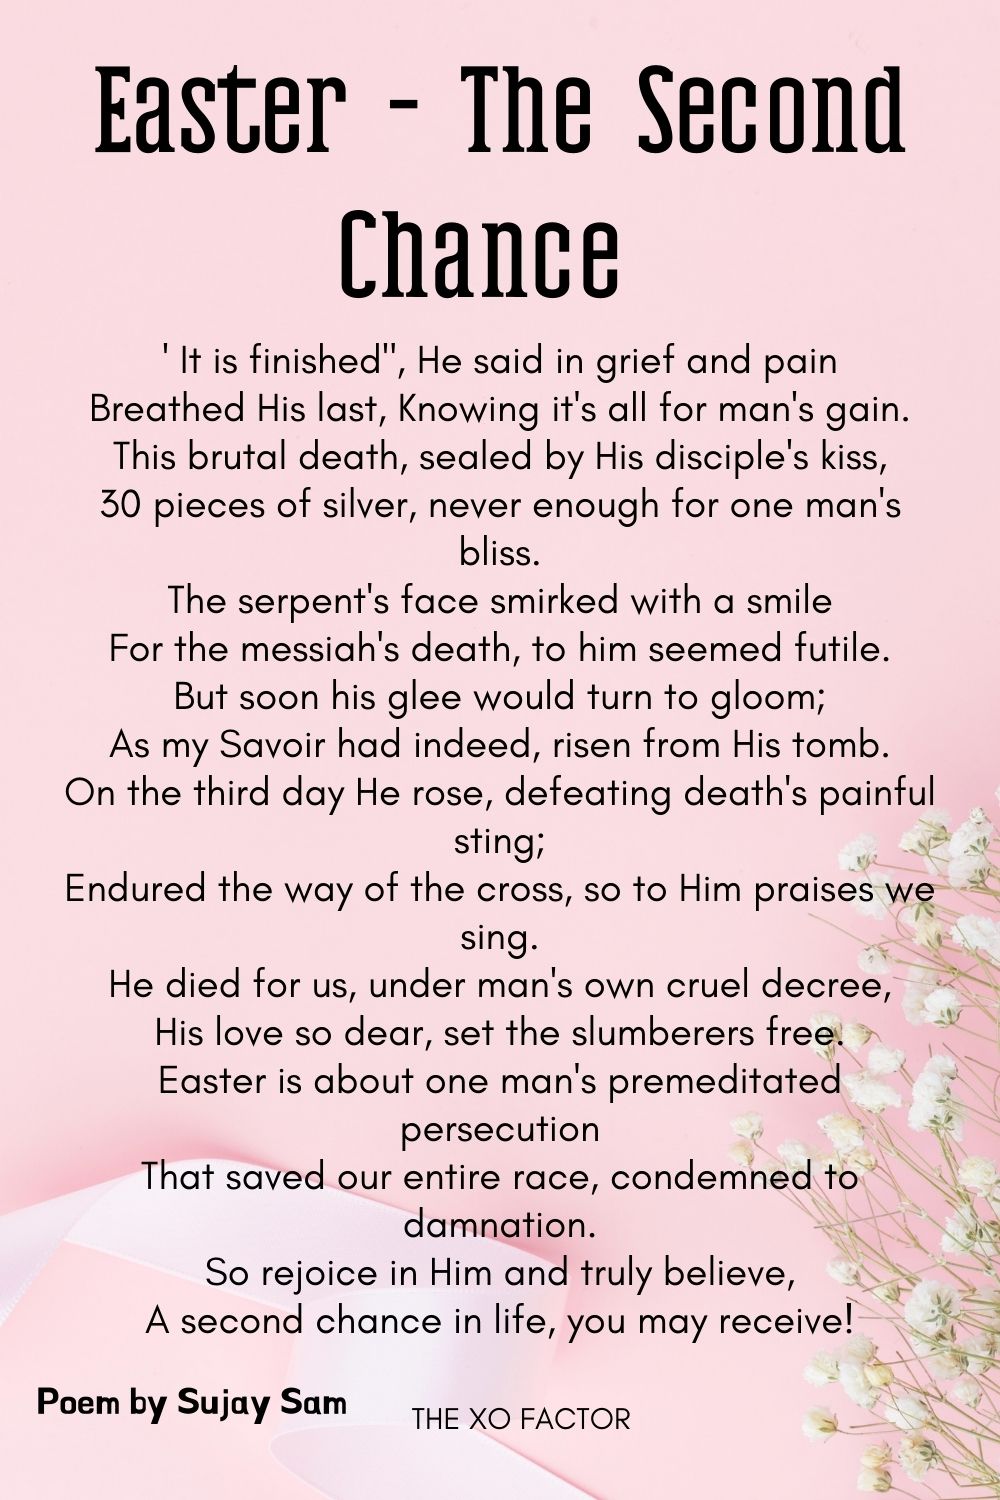 Easter - The Second Chance Poem by Sujay Sam